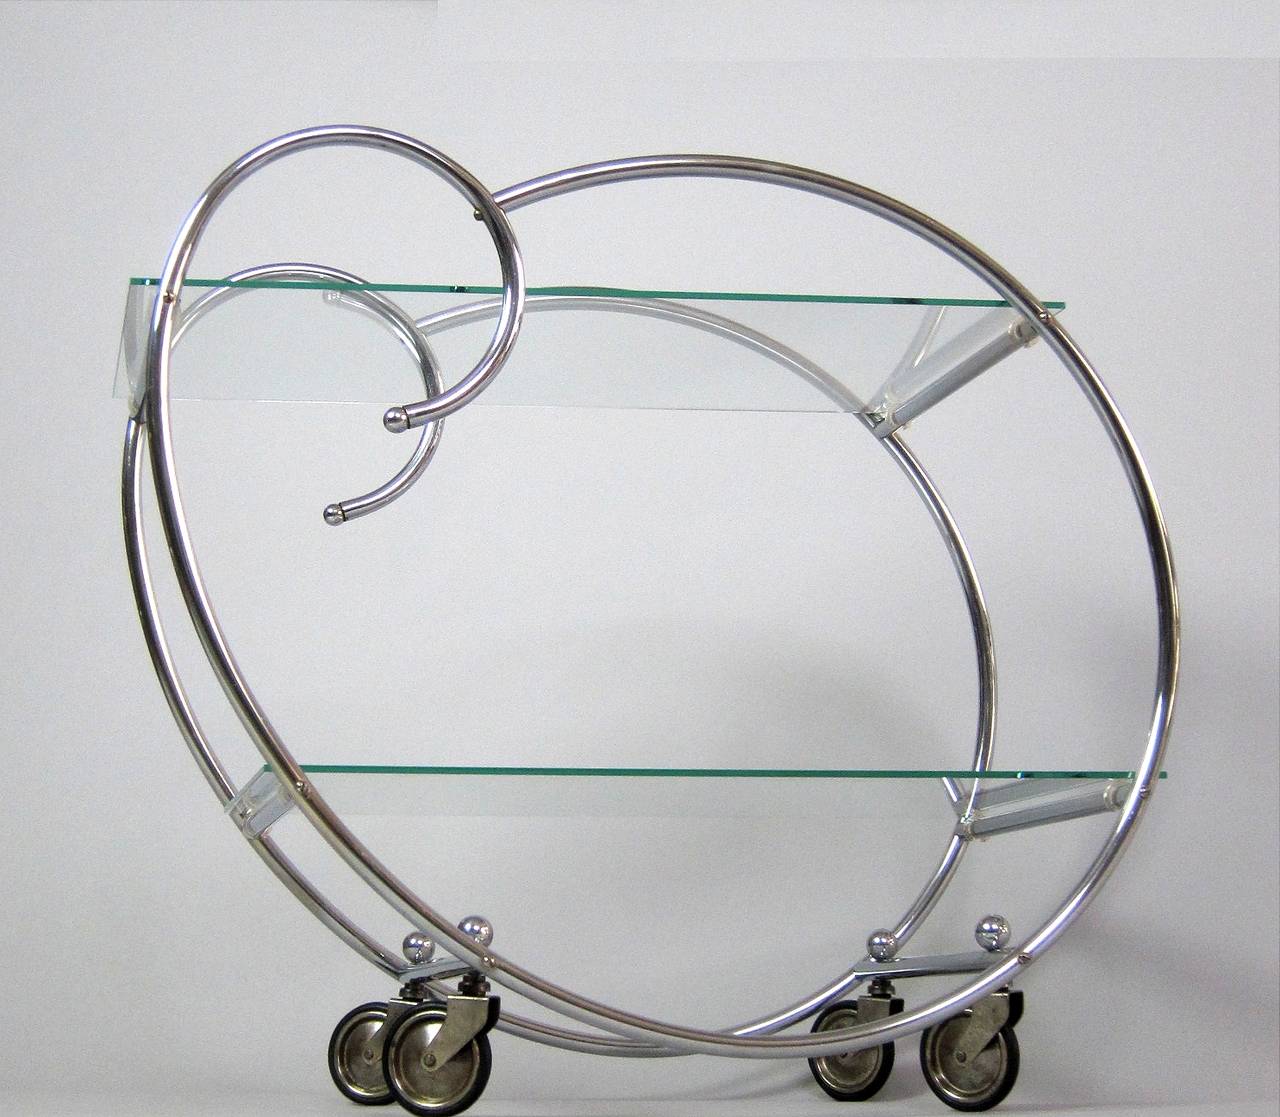 Clearly and concisely designed chrome trolley with two glass shelves, which has been replaced, France, 1930s.